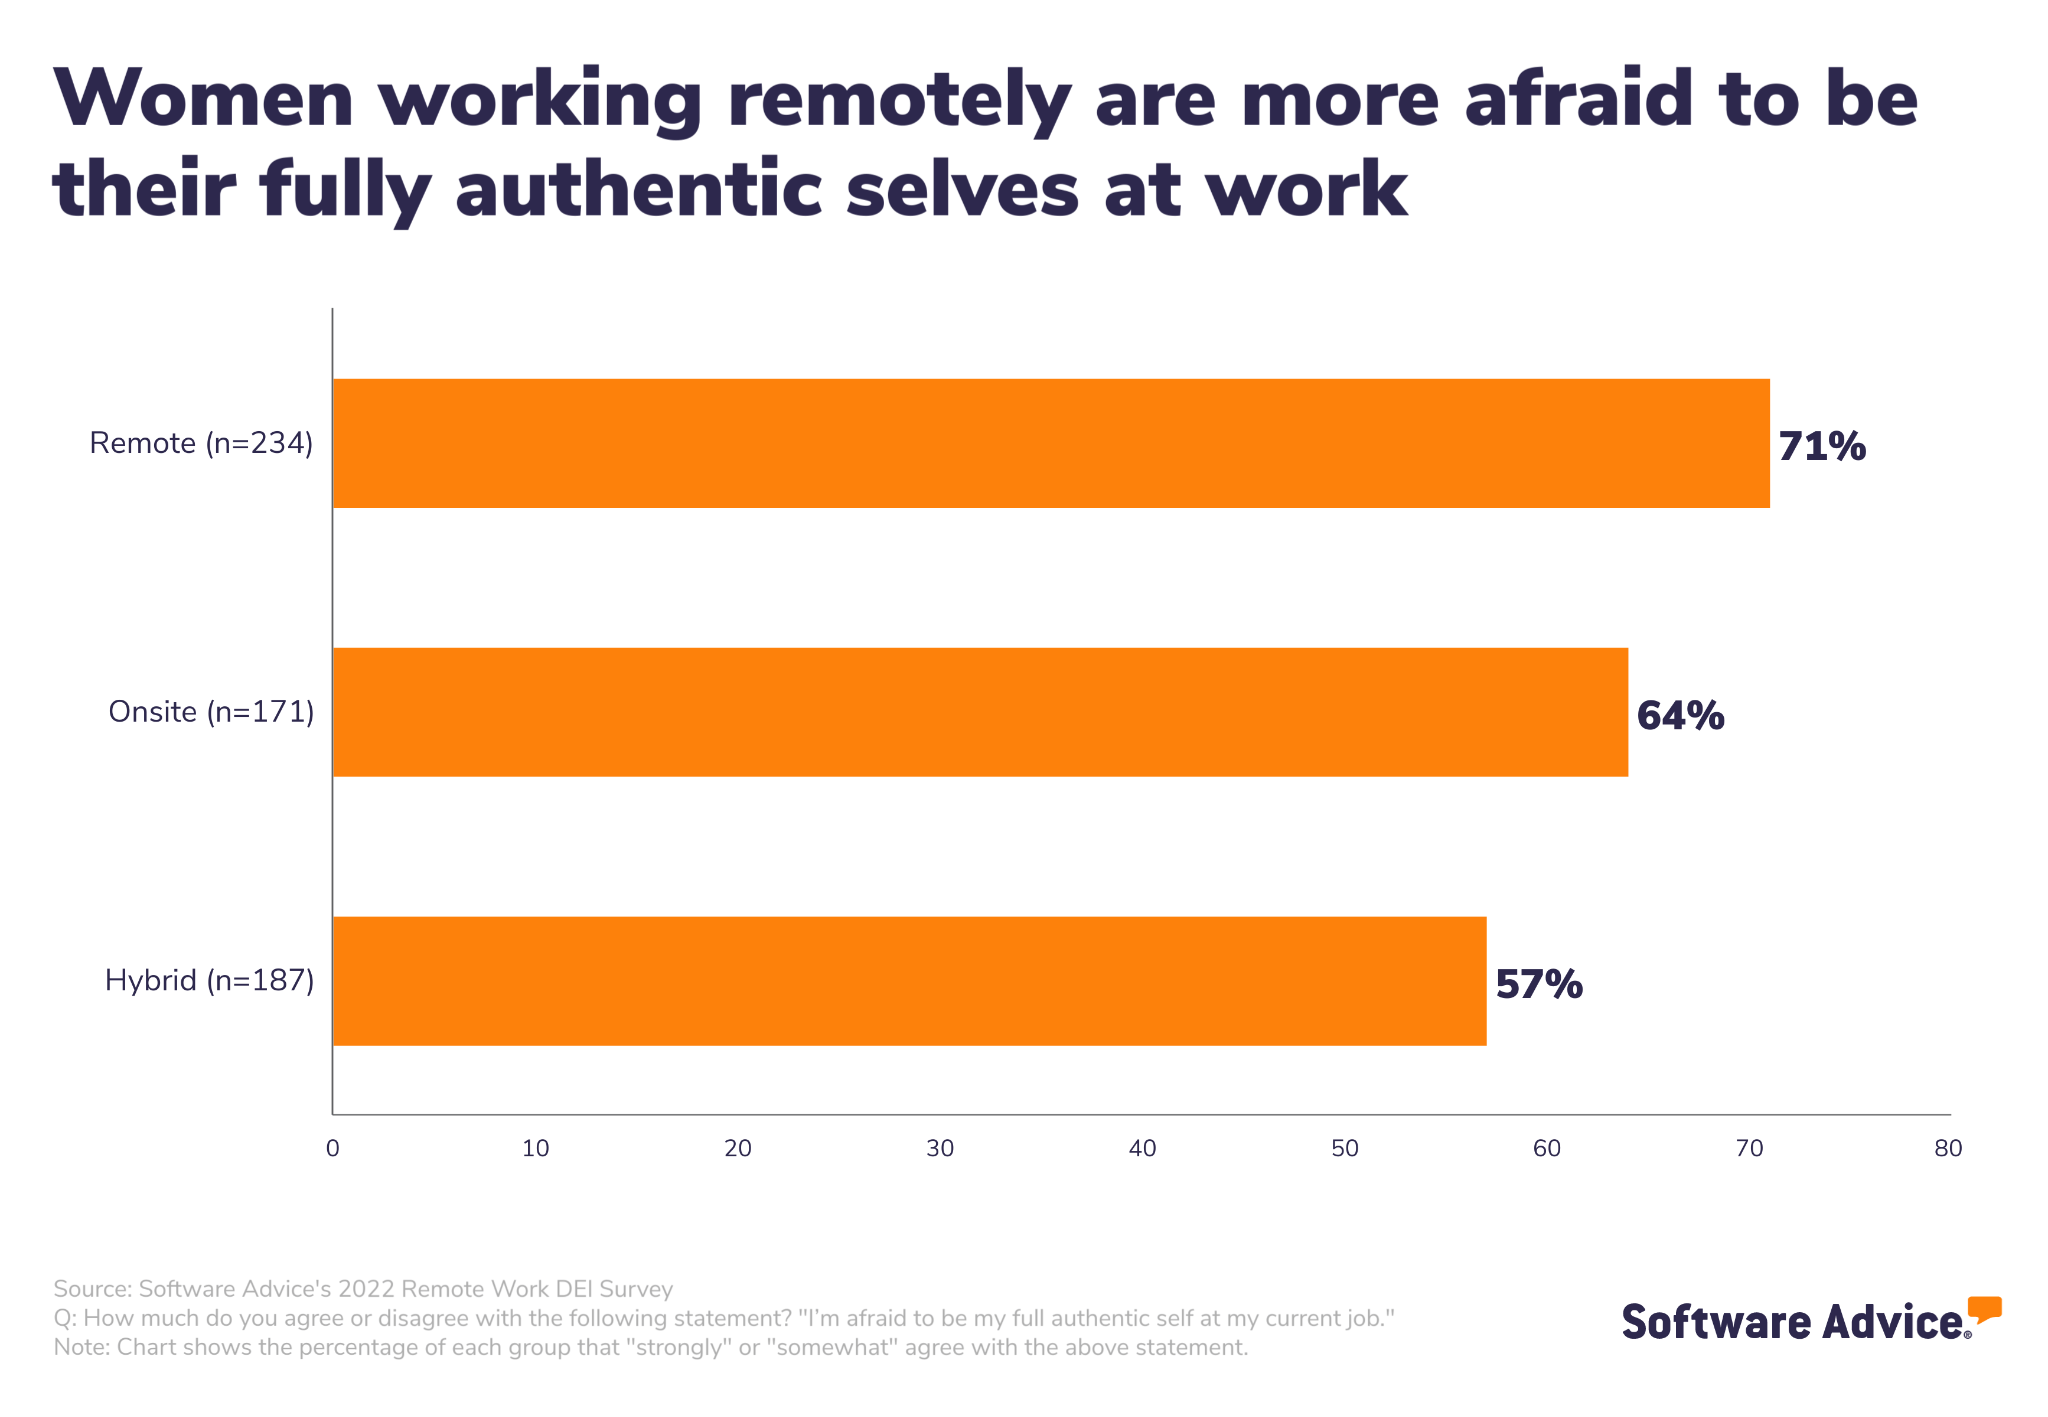 Bar chart showing women working remotely are more afraid to be their authentic selves at work